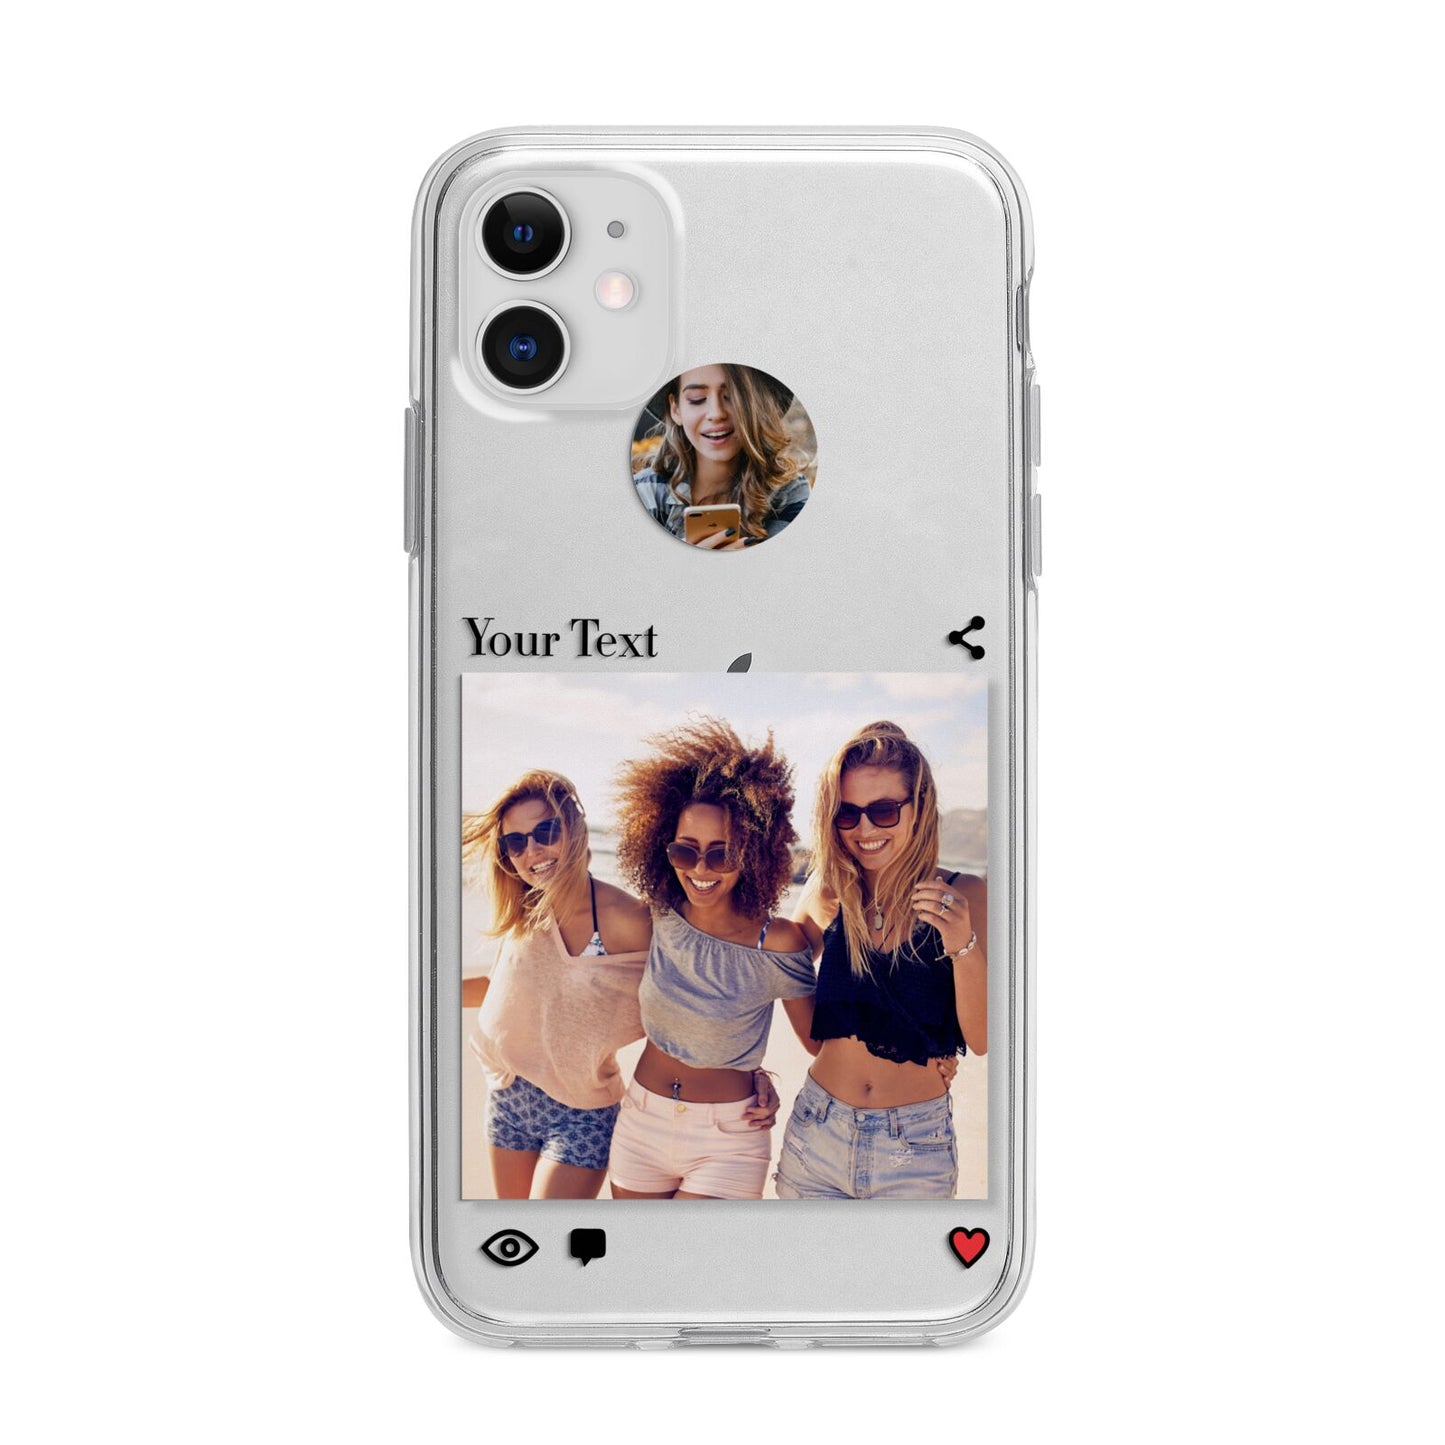 Social Media Photo Apple iPhone 11 in White with Bumper Case